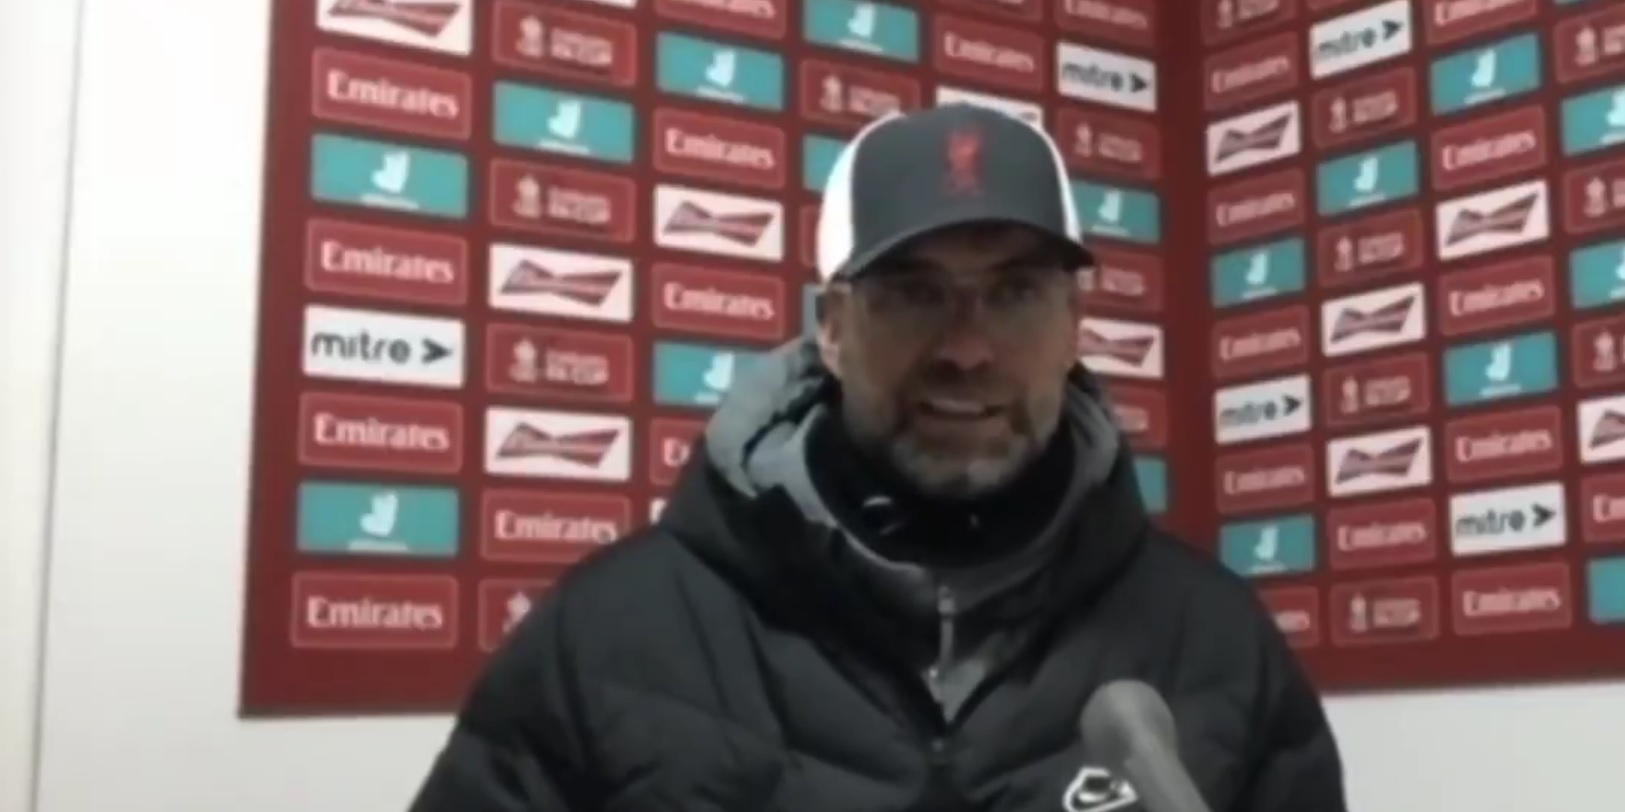 (Video) Klopp stresses Liverpool aren’t resting on their laurels: “You don’t have to worry about us”